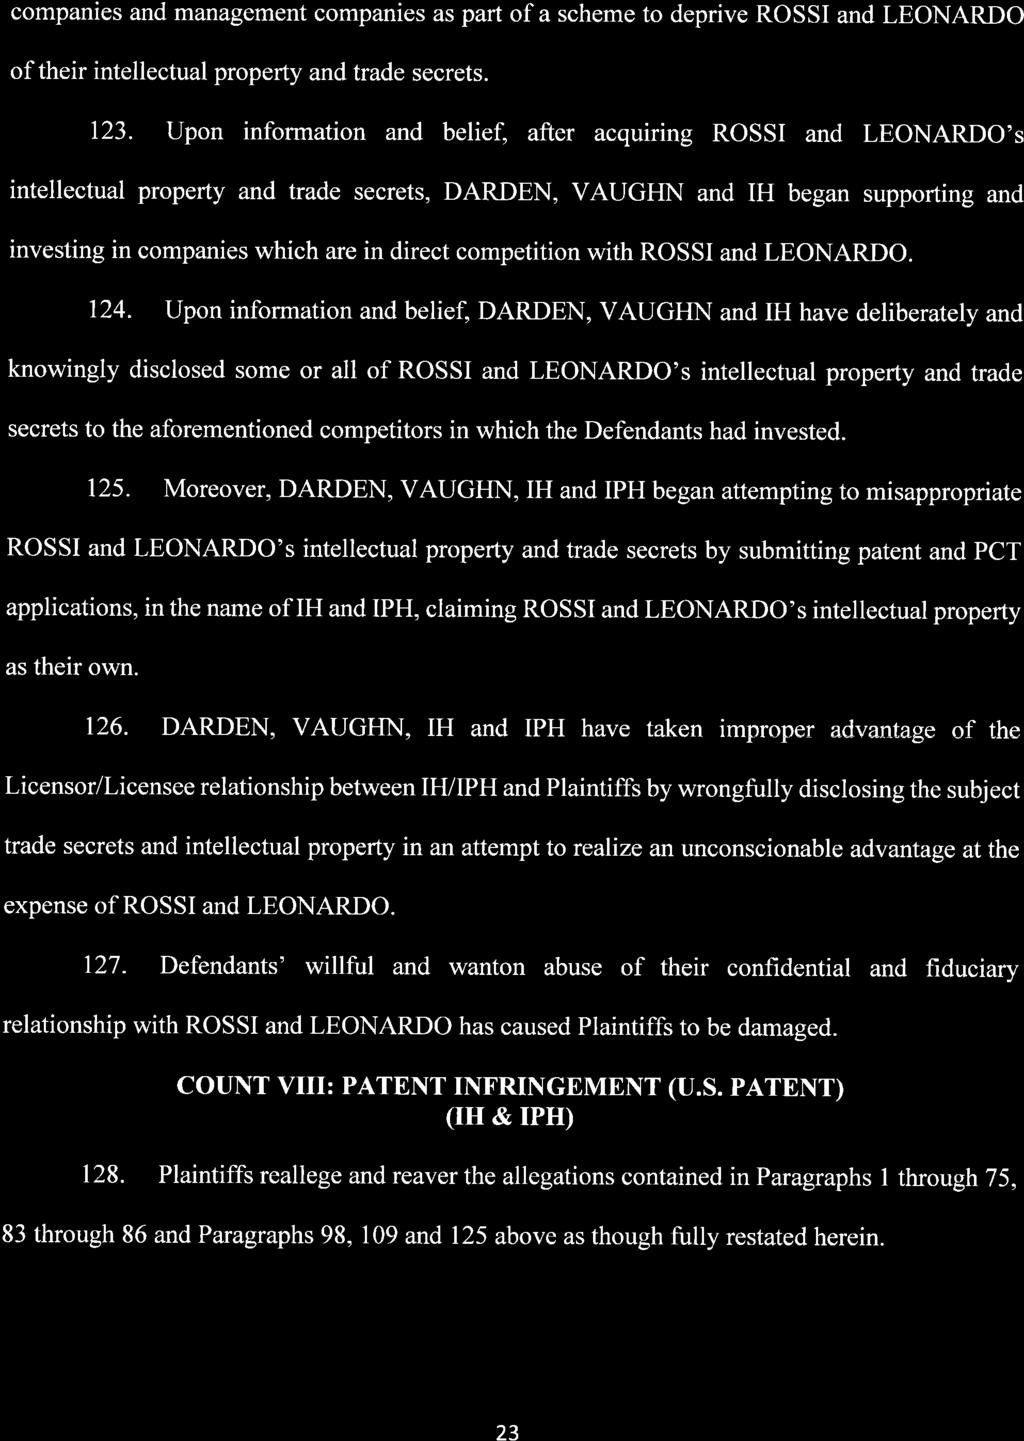 Case 1:16-cv-21199-CMA Document 1 Entered on FLSD Docket 04/05/2016 Page 23 of 27 companies and management companies as part of a scheme to deprive ROSSI and LEONARDO of their intellectual property